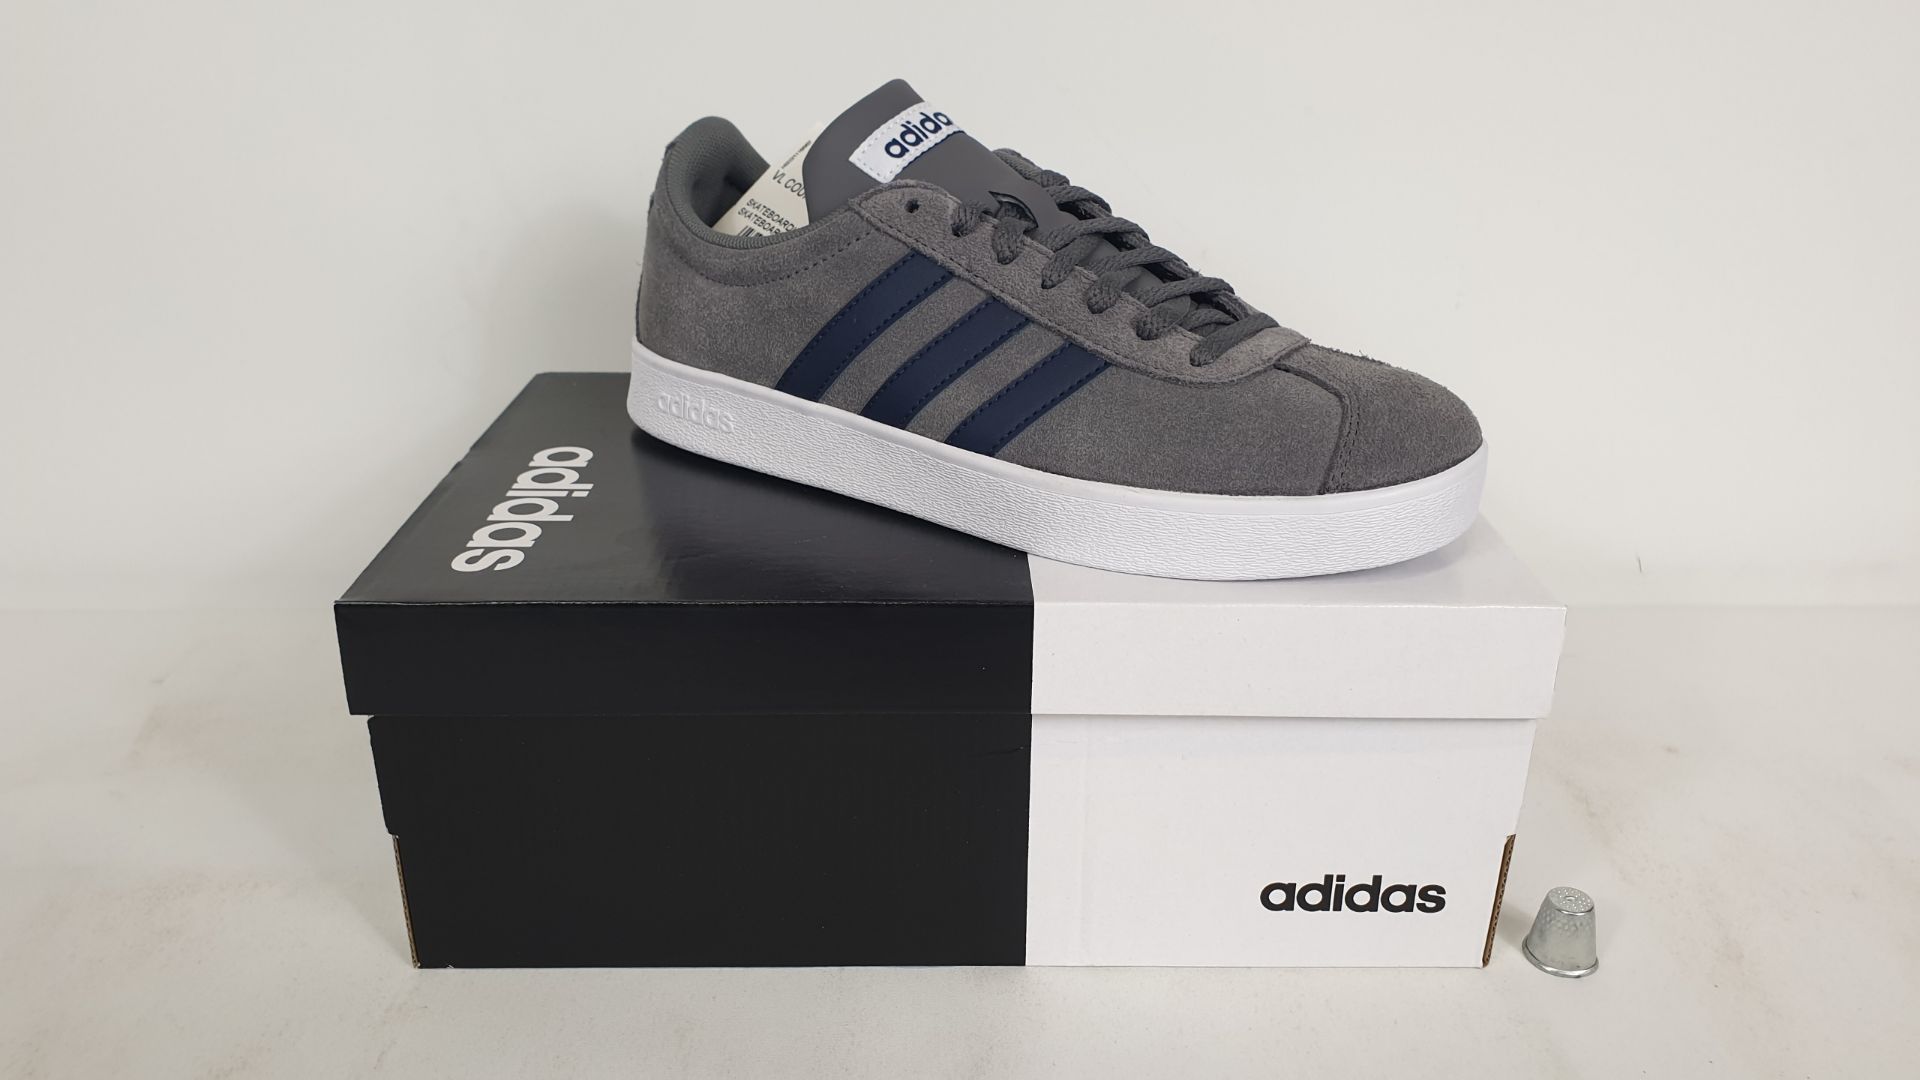 5 X PAIRS OF ADIDAS TRAINERS VL COURT 2.0 GREY W/ NAVY STRIPES SIZE 3.5 - BRAND NEW AND BOXED